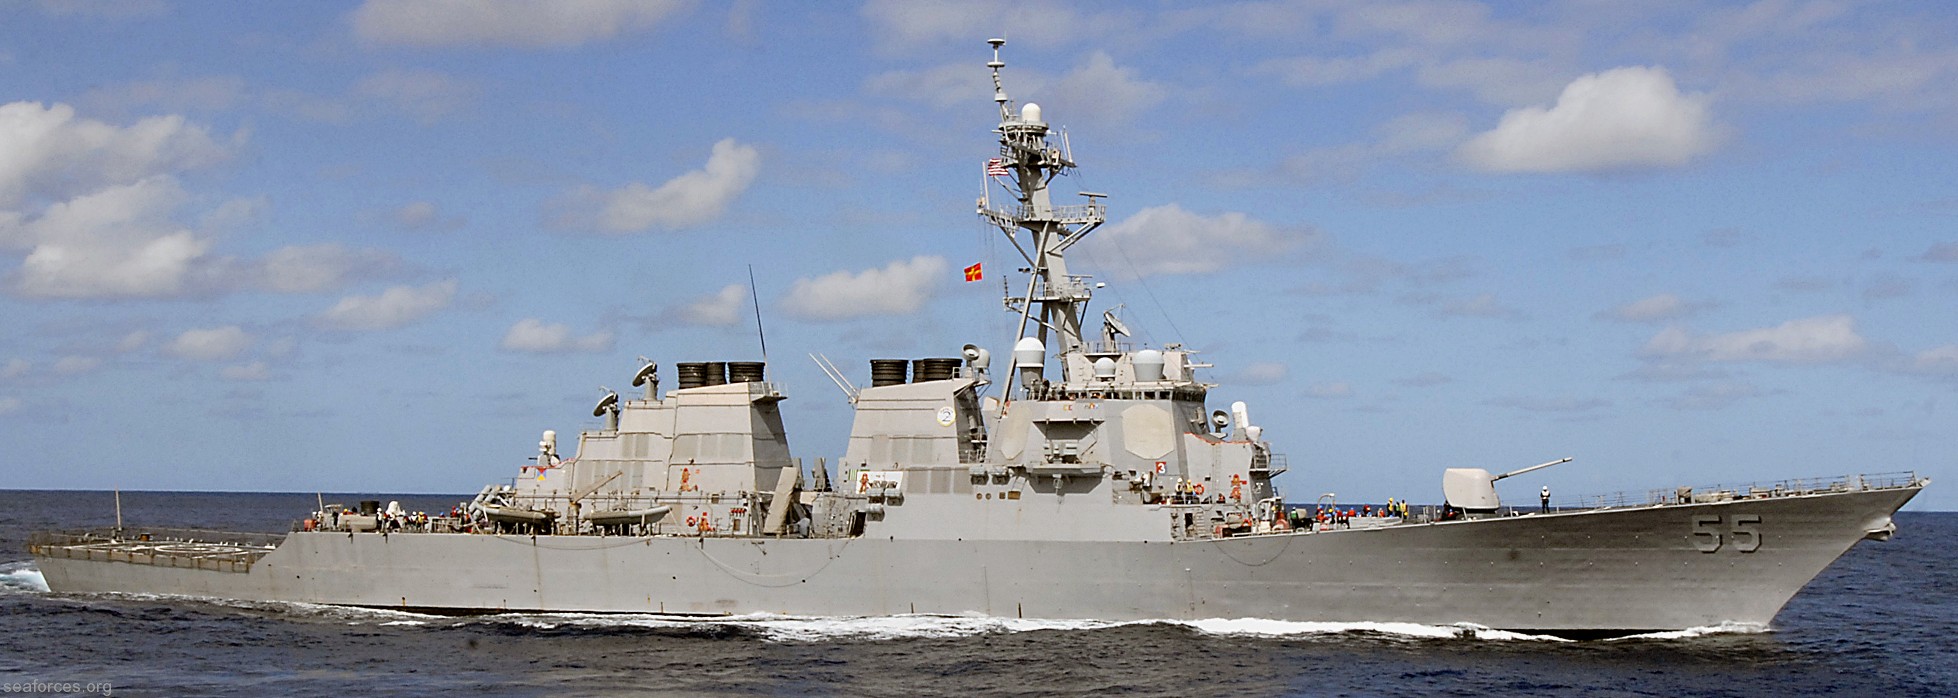 ddg-55 uss stout guided missile destroyer us navy 84